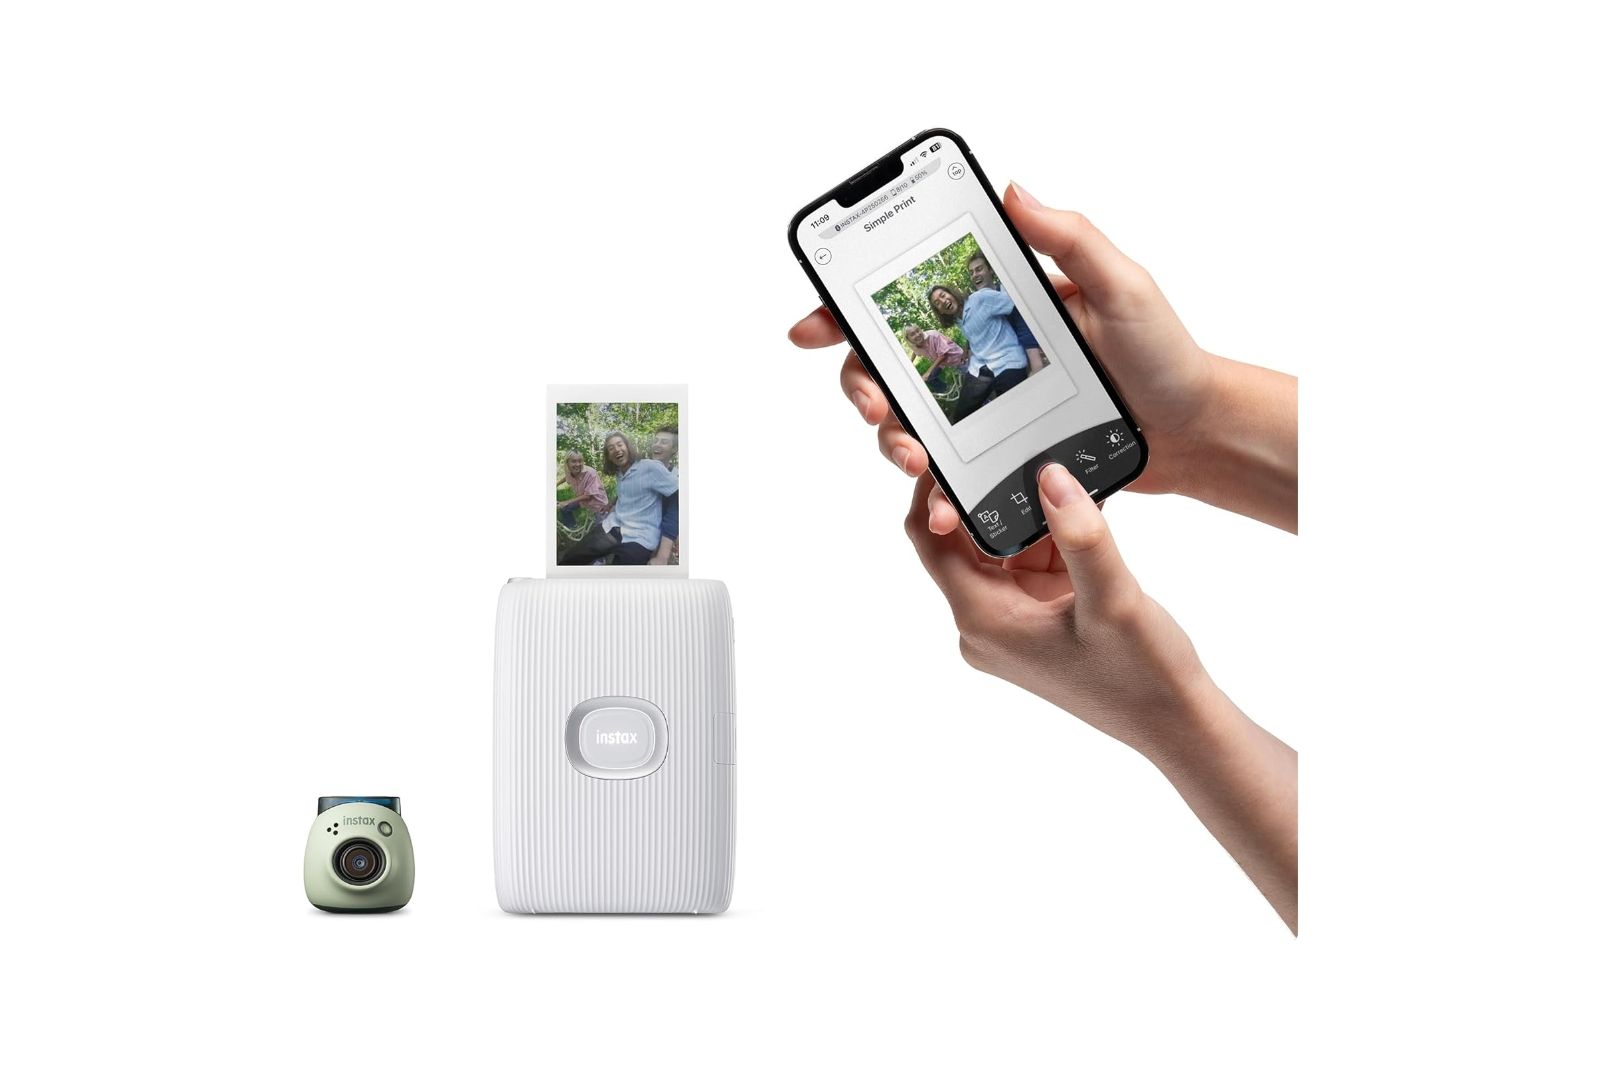 A tiny camera, printer with a photo coming out, and hands holding a smartphone.